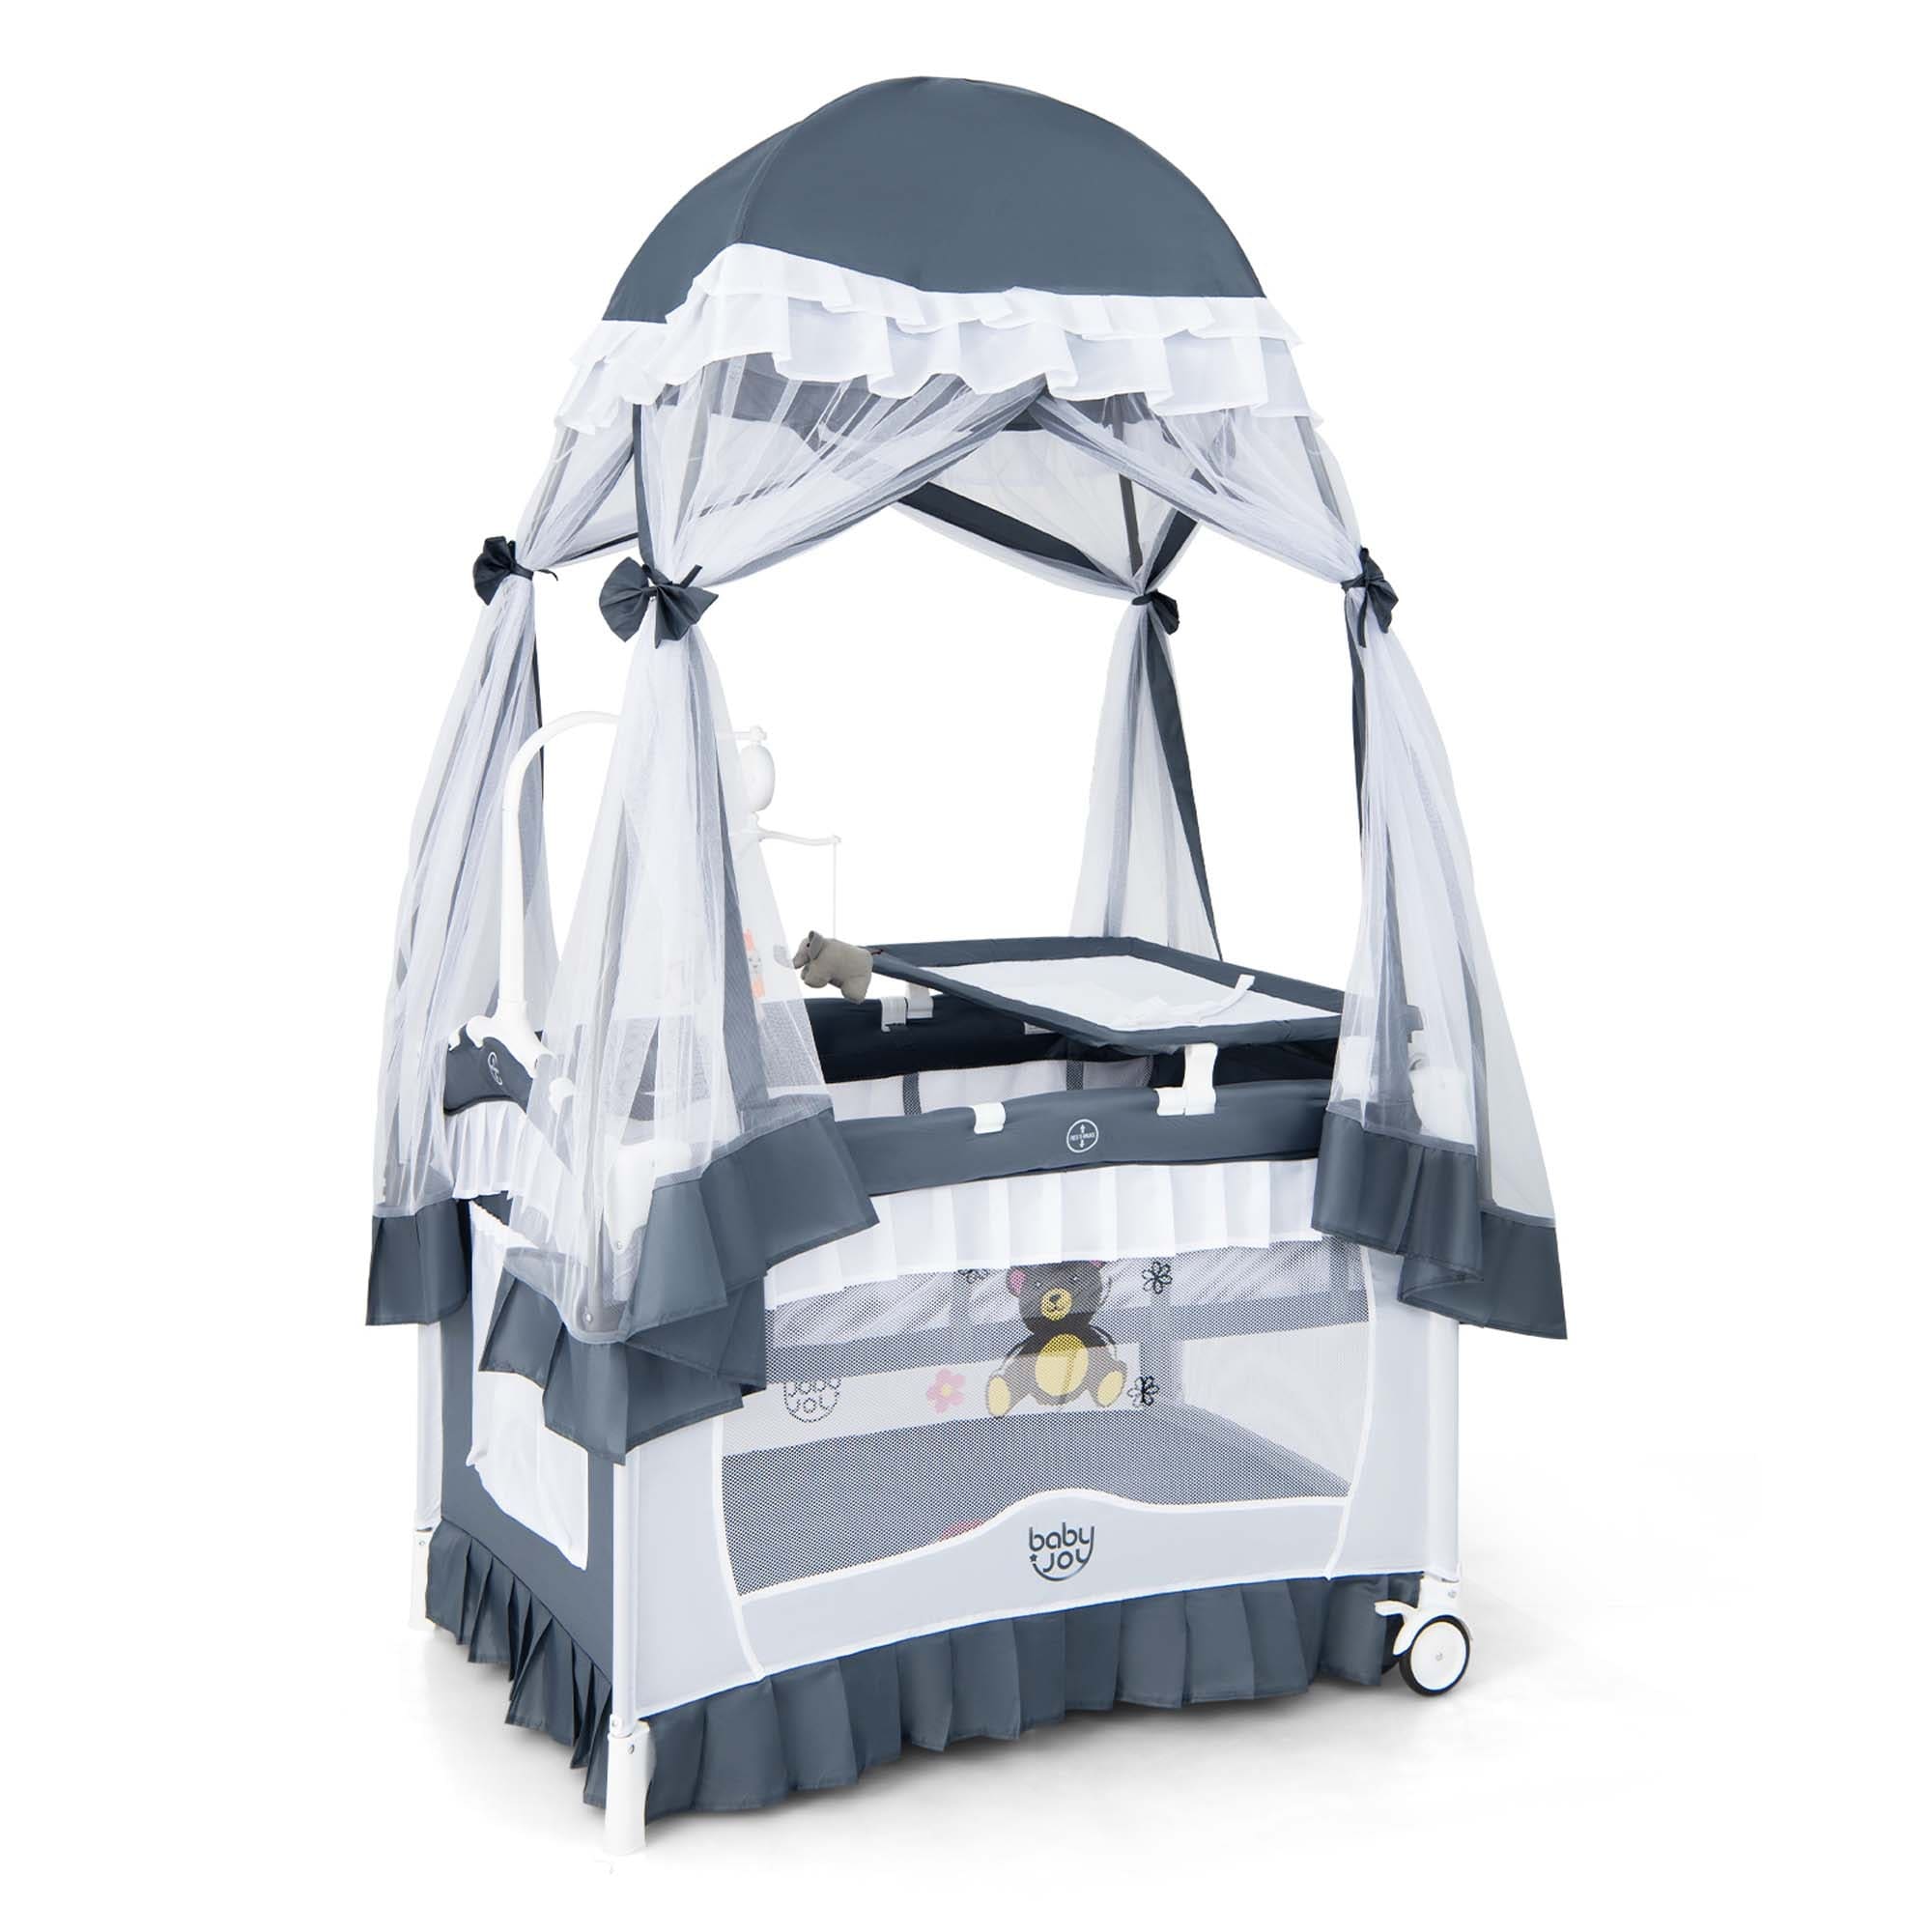 Babyjoy Baby Playard Crib Bed 4 in 1 Portable with Changing Table